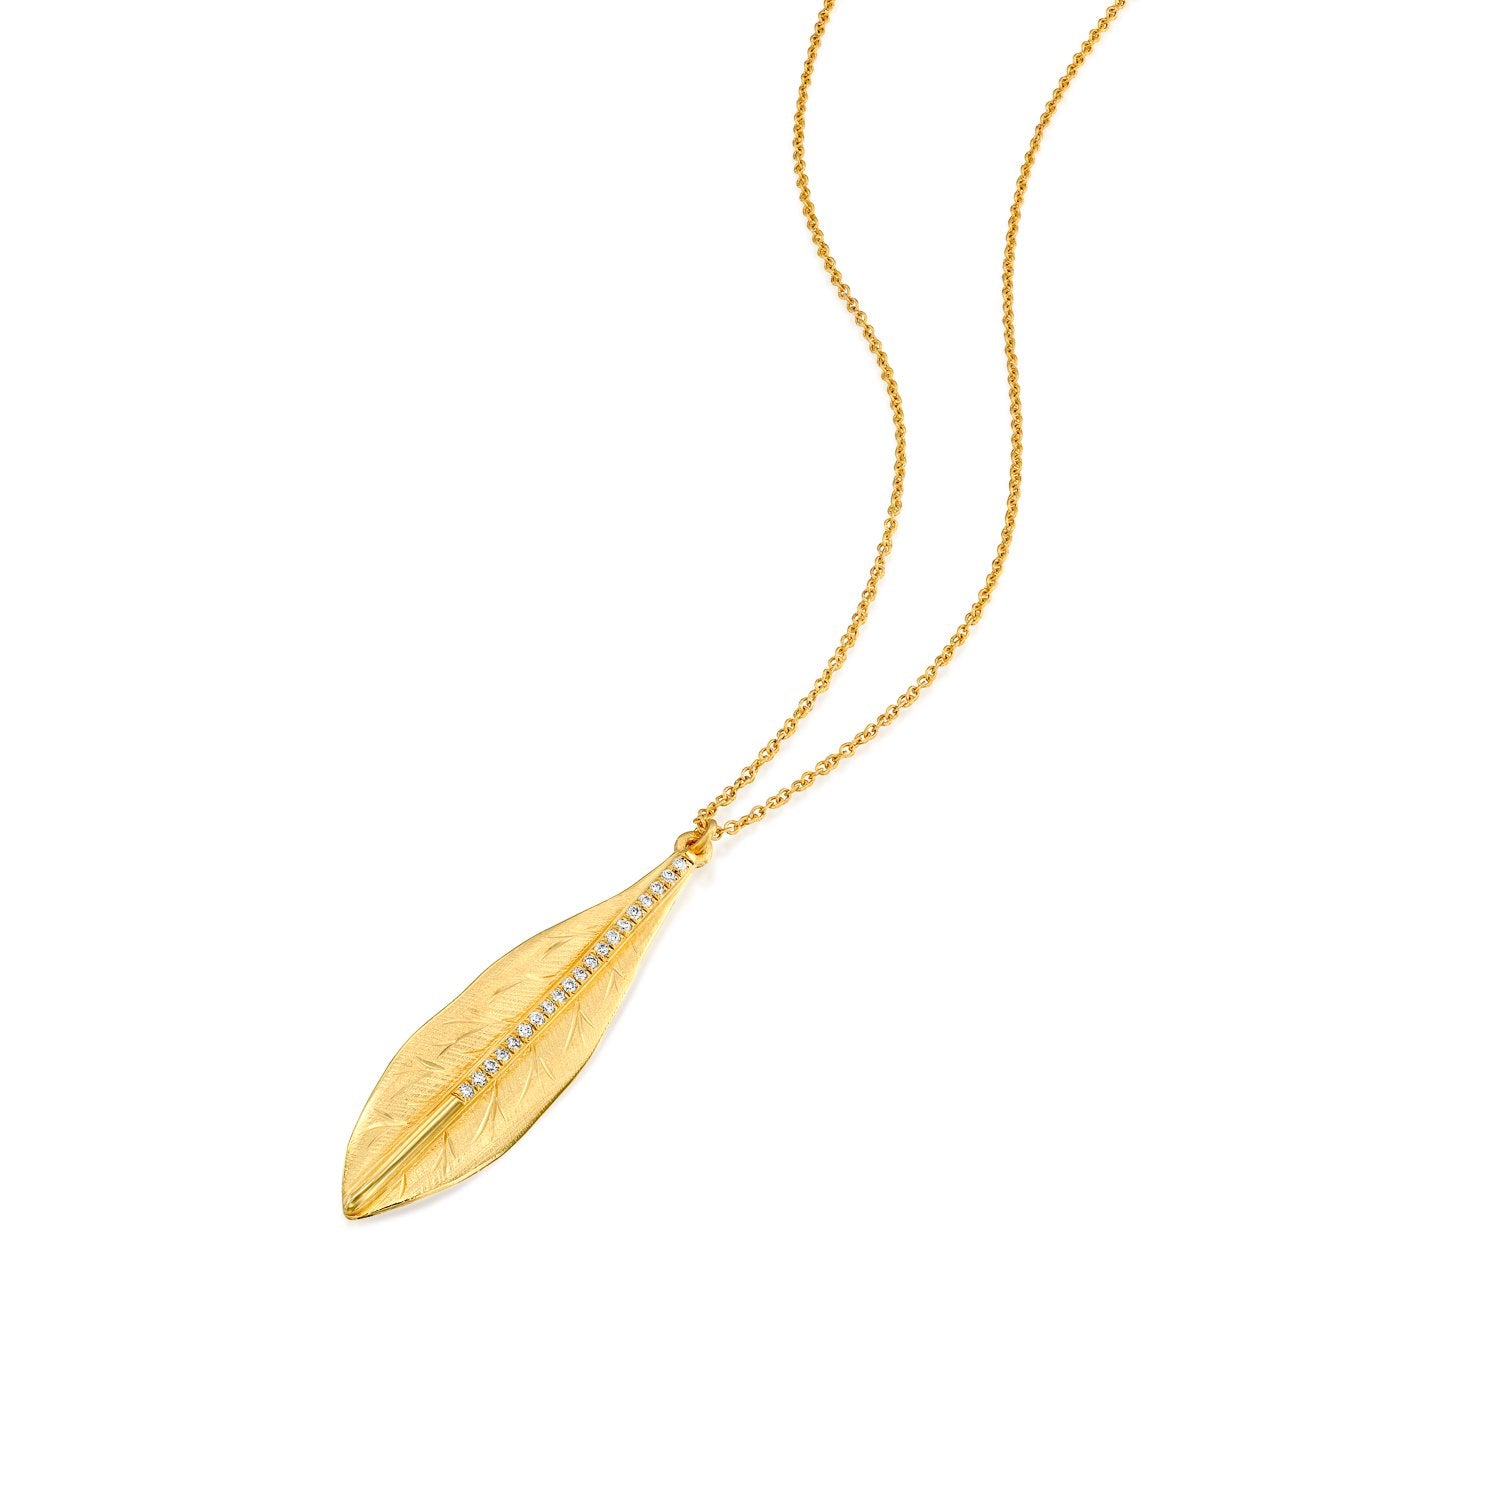 6332 - 14kt yellow gold handcrafted diamond leaf necklace